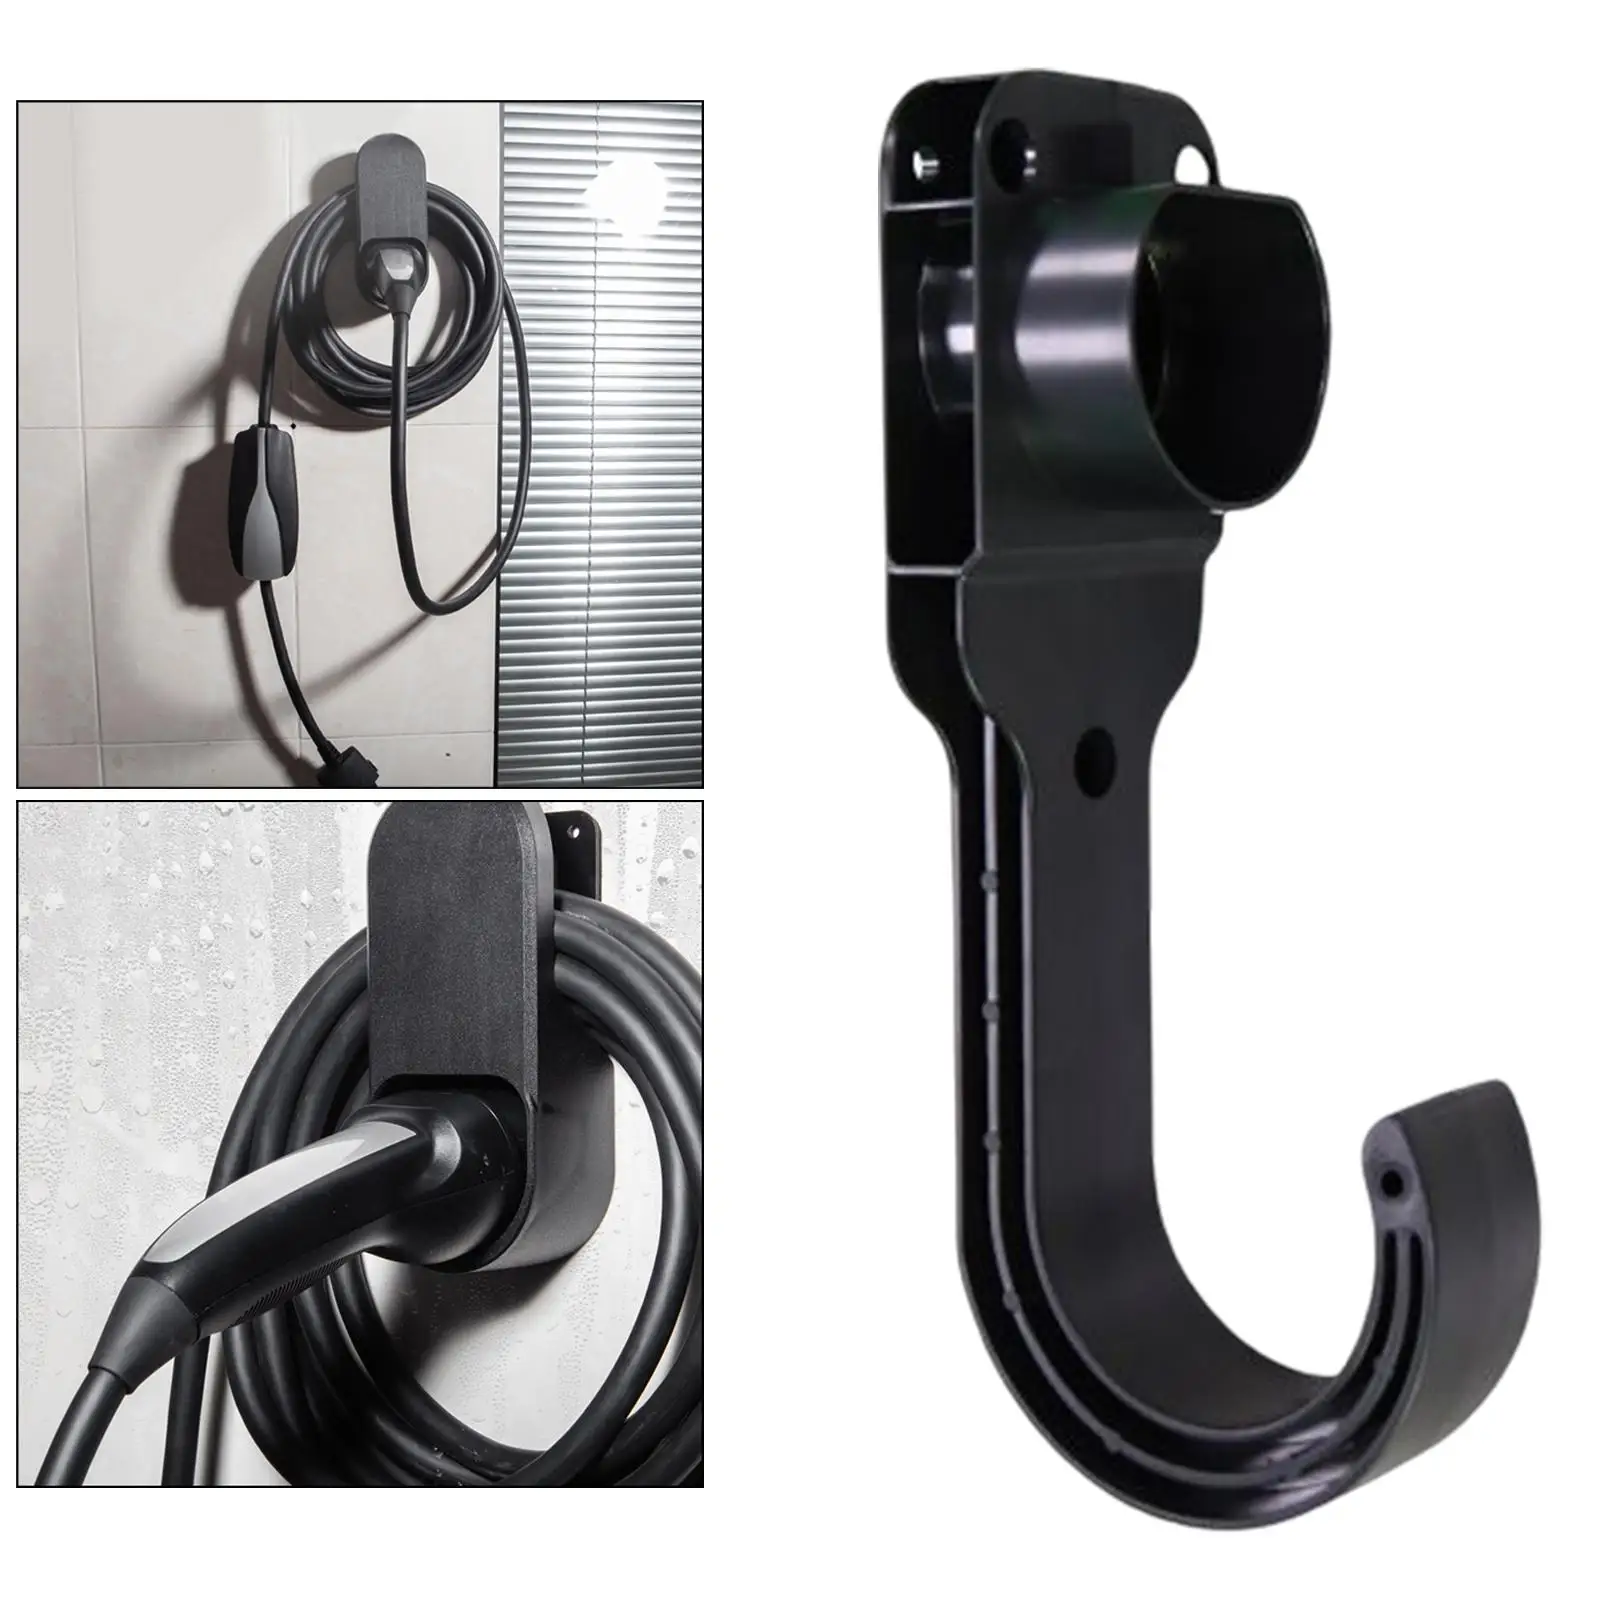 EV Charger Holder EV Electric Vehicle Bracket Wall Mount Charging Cable Organizer Accessory Car with Hook Screws Holster Dock